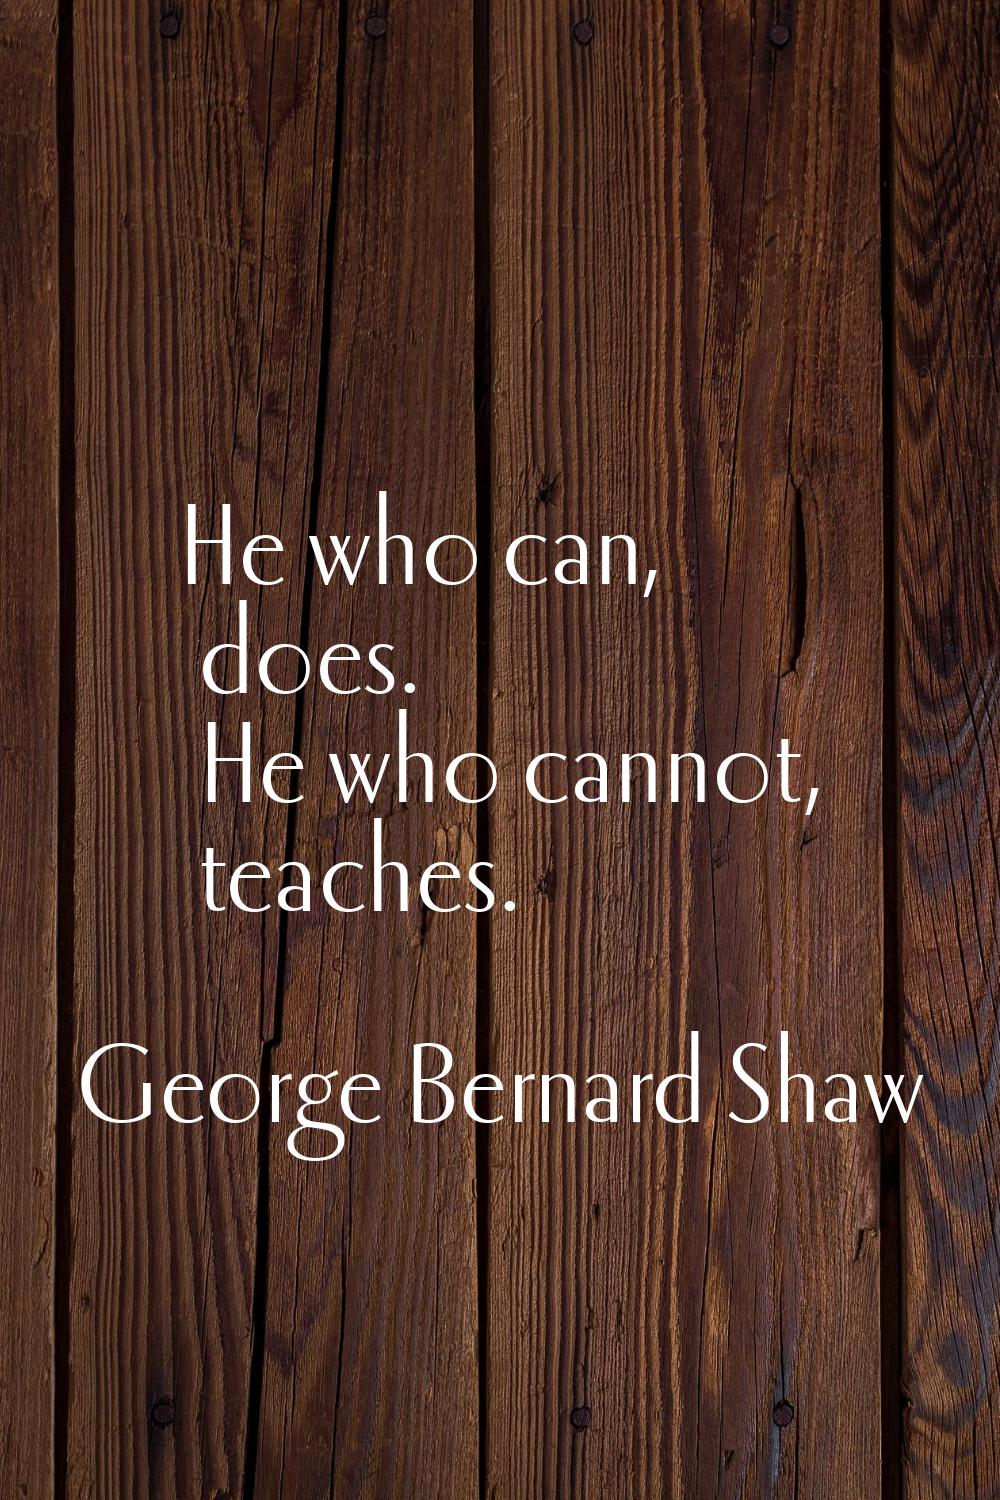 He who can, does. He who cannot, teaches.